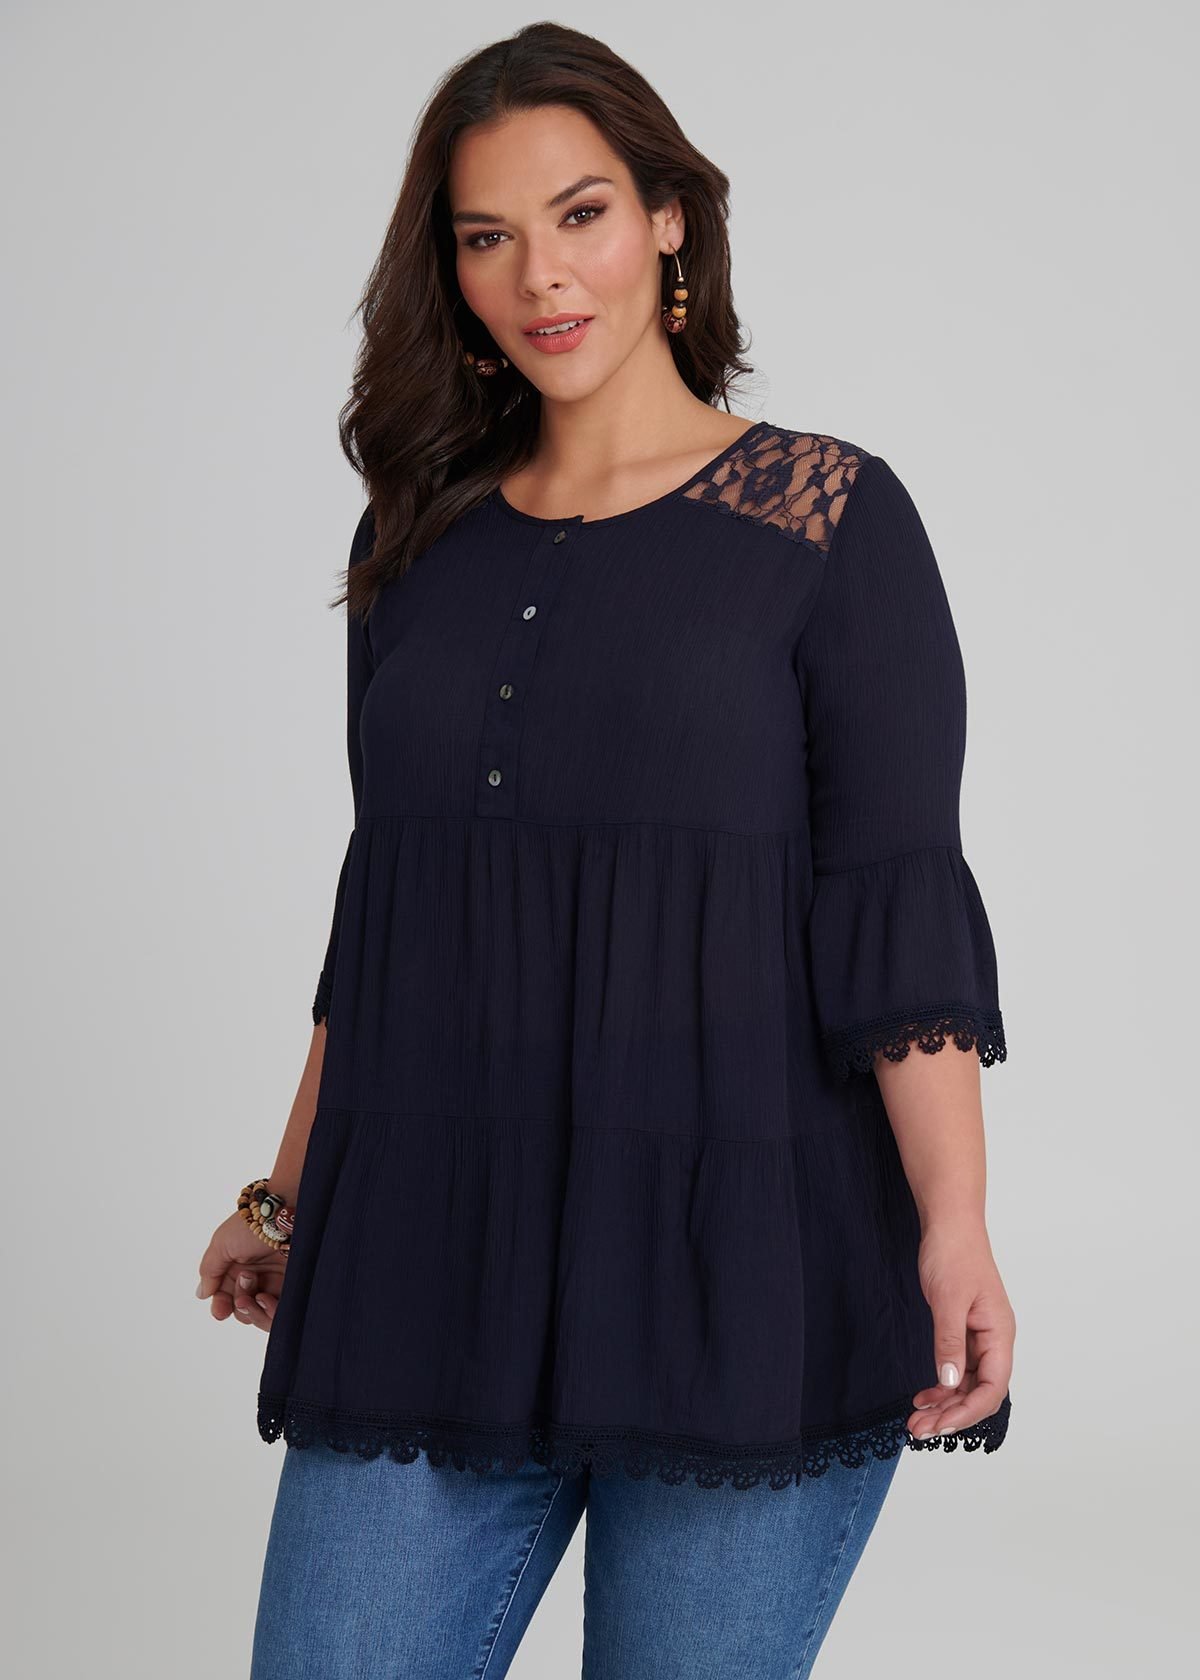 Sea Lace Blouse in navy in sizes 12 to 24 | Taking Shape New Zealand